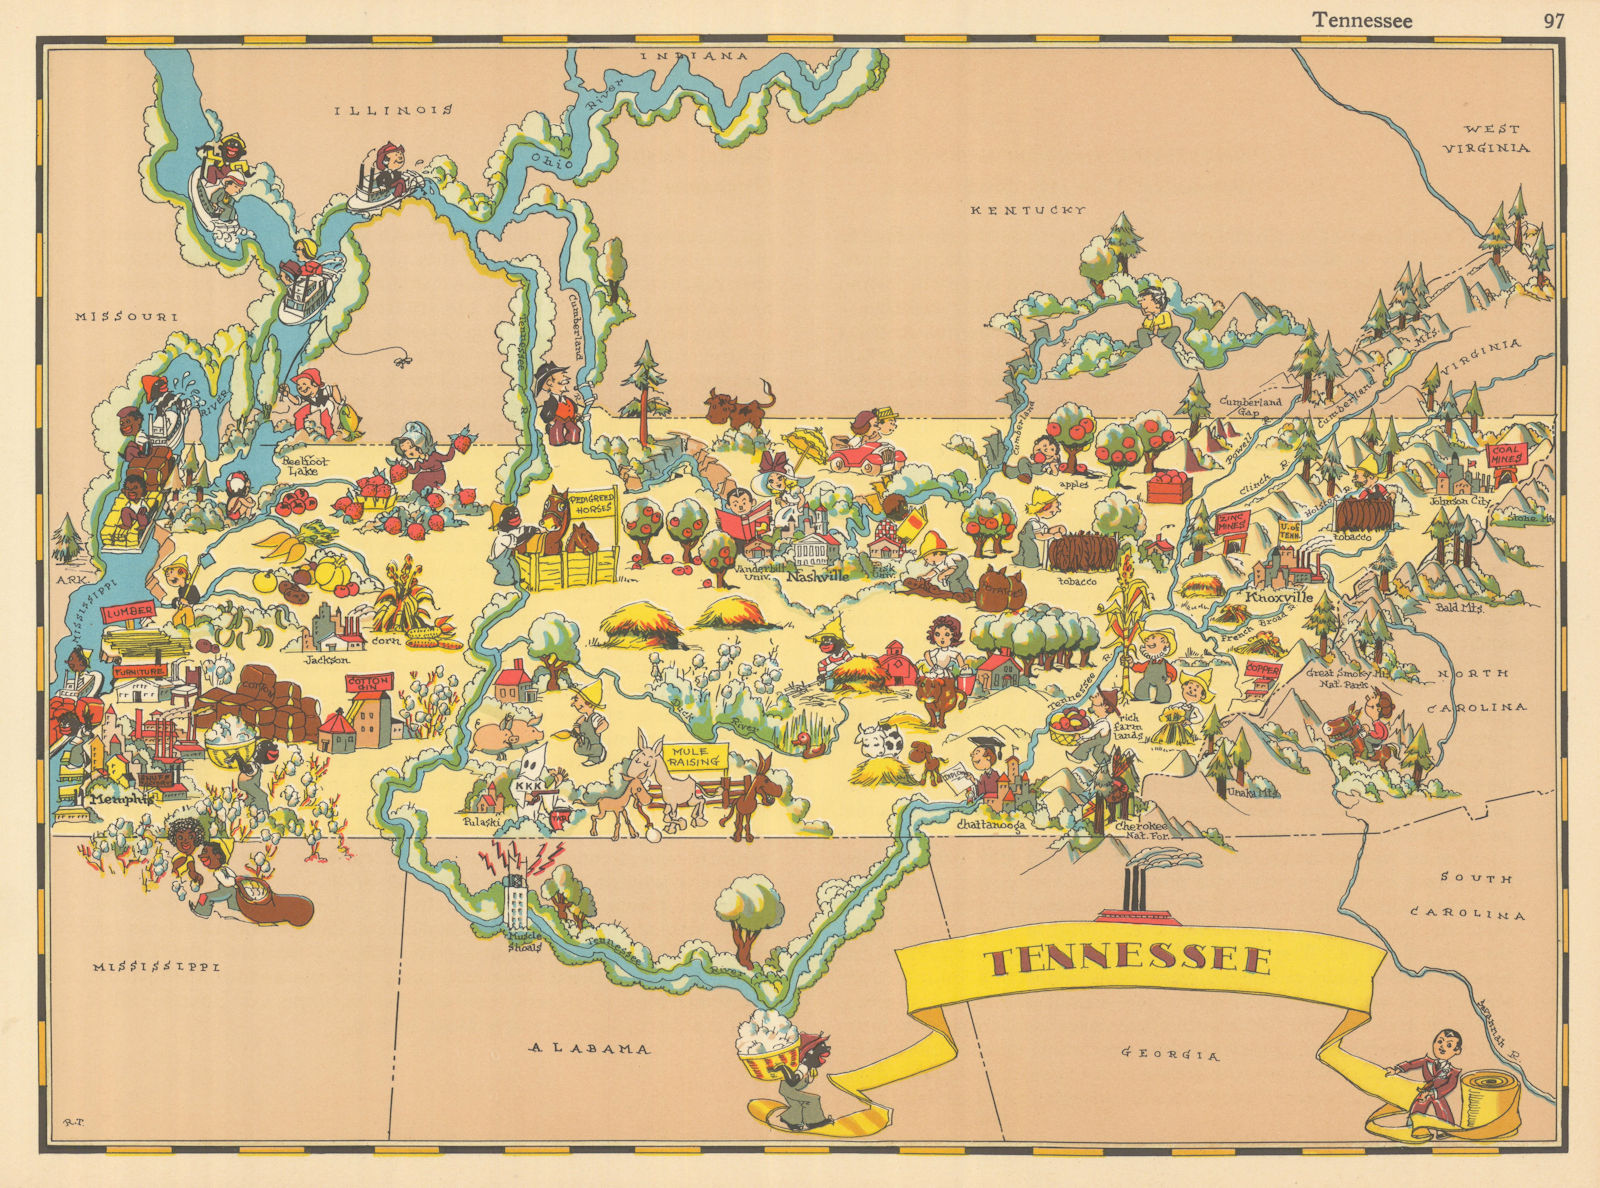 Associate Product Tennessee. Pictorial state map by Ruth Taylor White 1935 old vintage chart